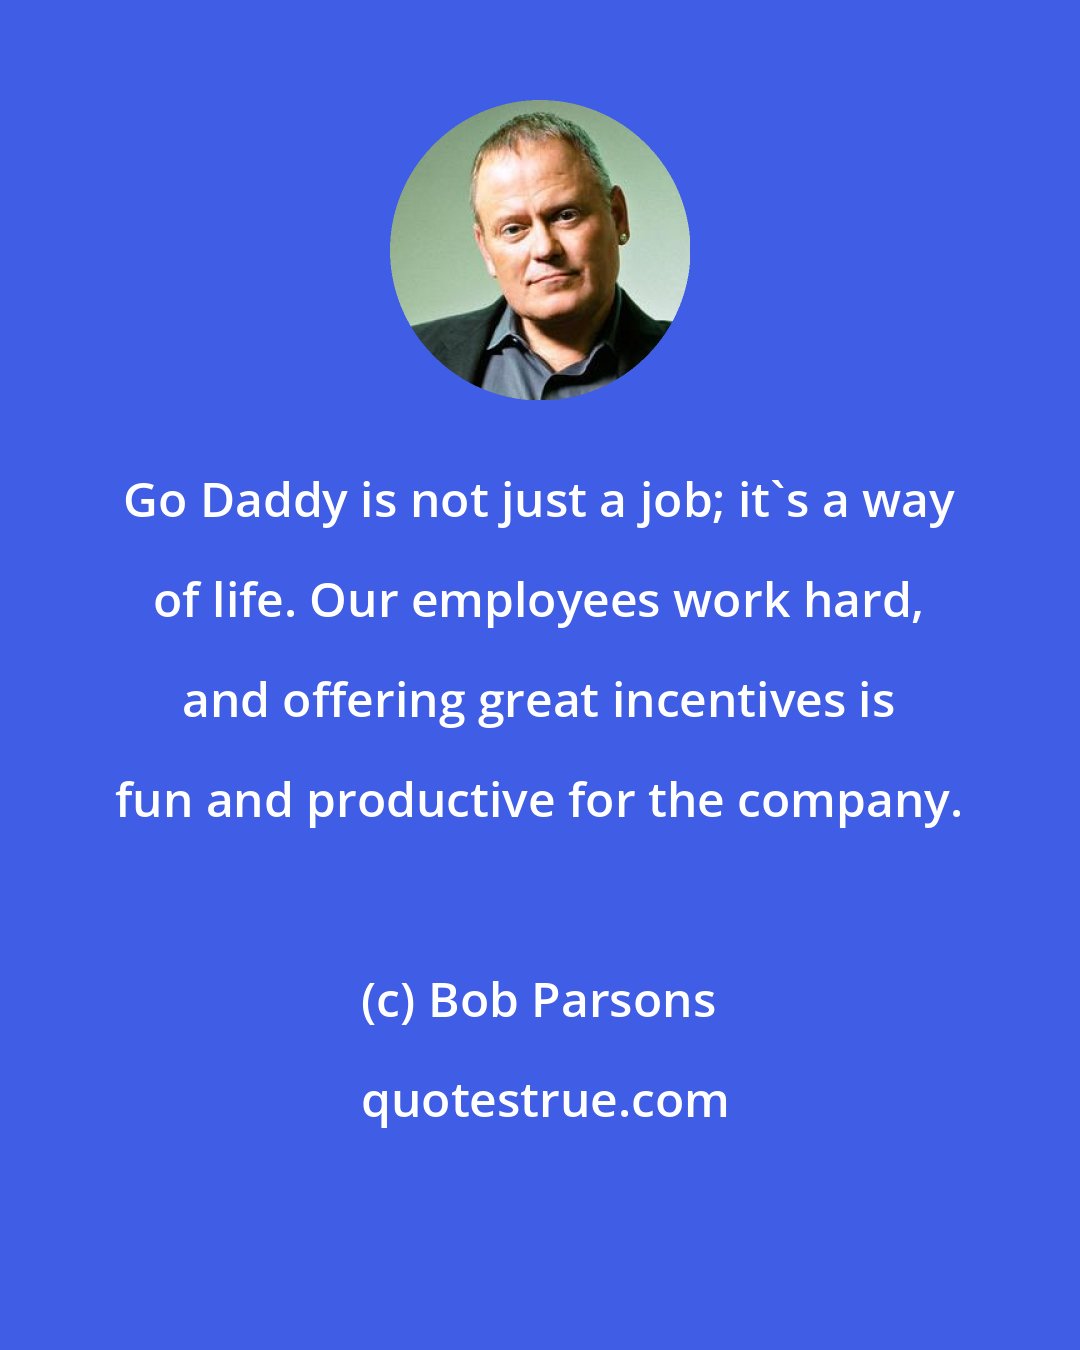 Bob Parsons: Go Daddy is not just a job; it's a way of life. Our employees work hard, and offering great incentives is fun and productive for the company.